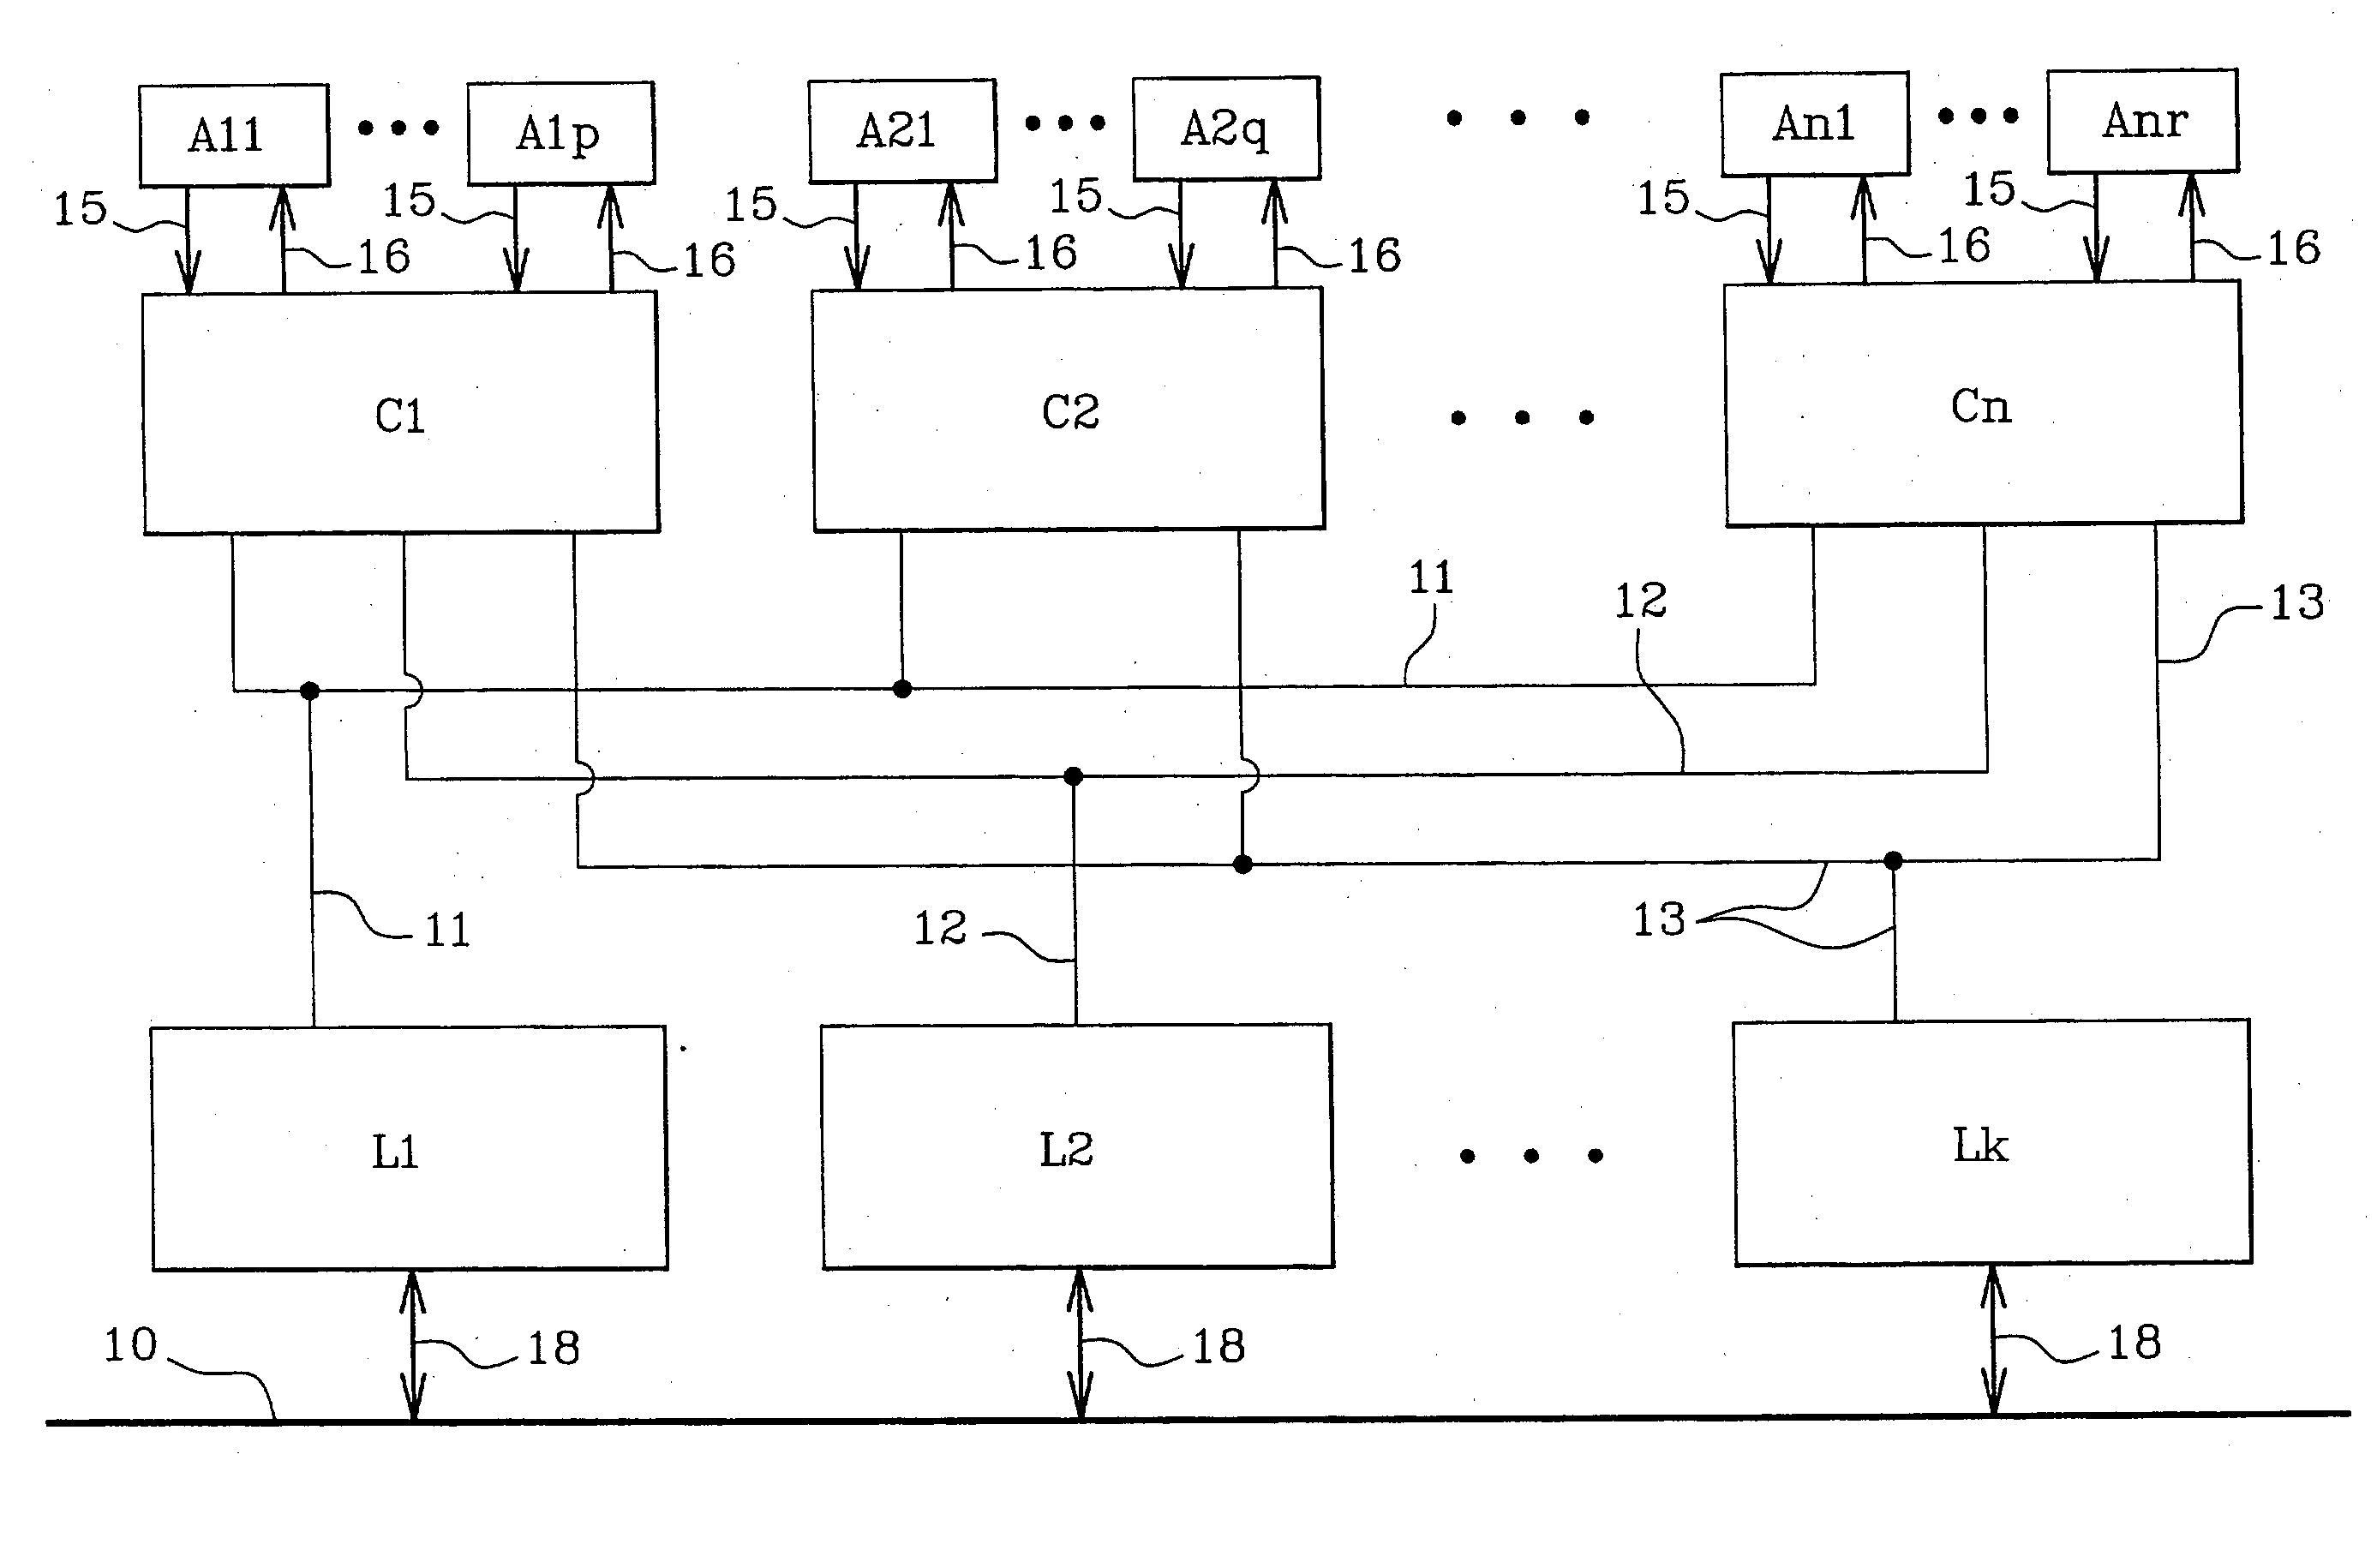 Control system and process for several actuators